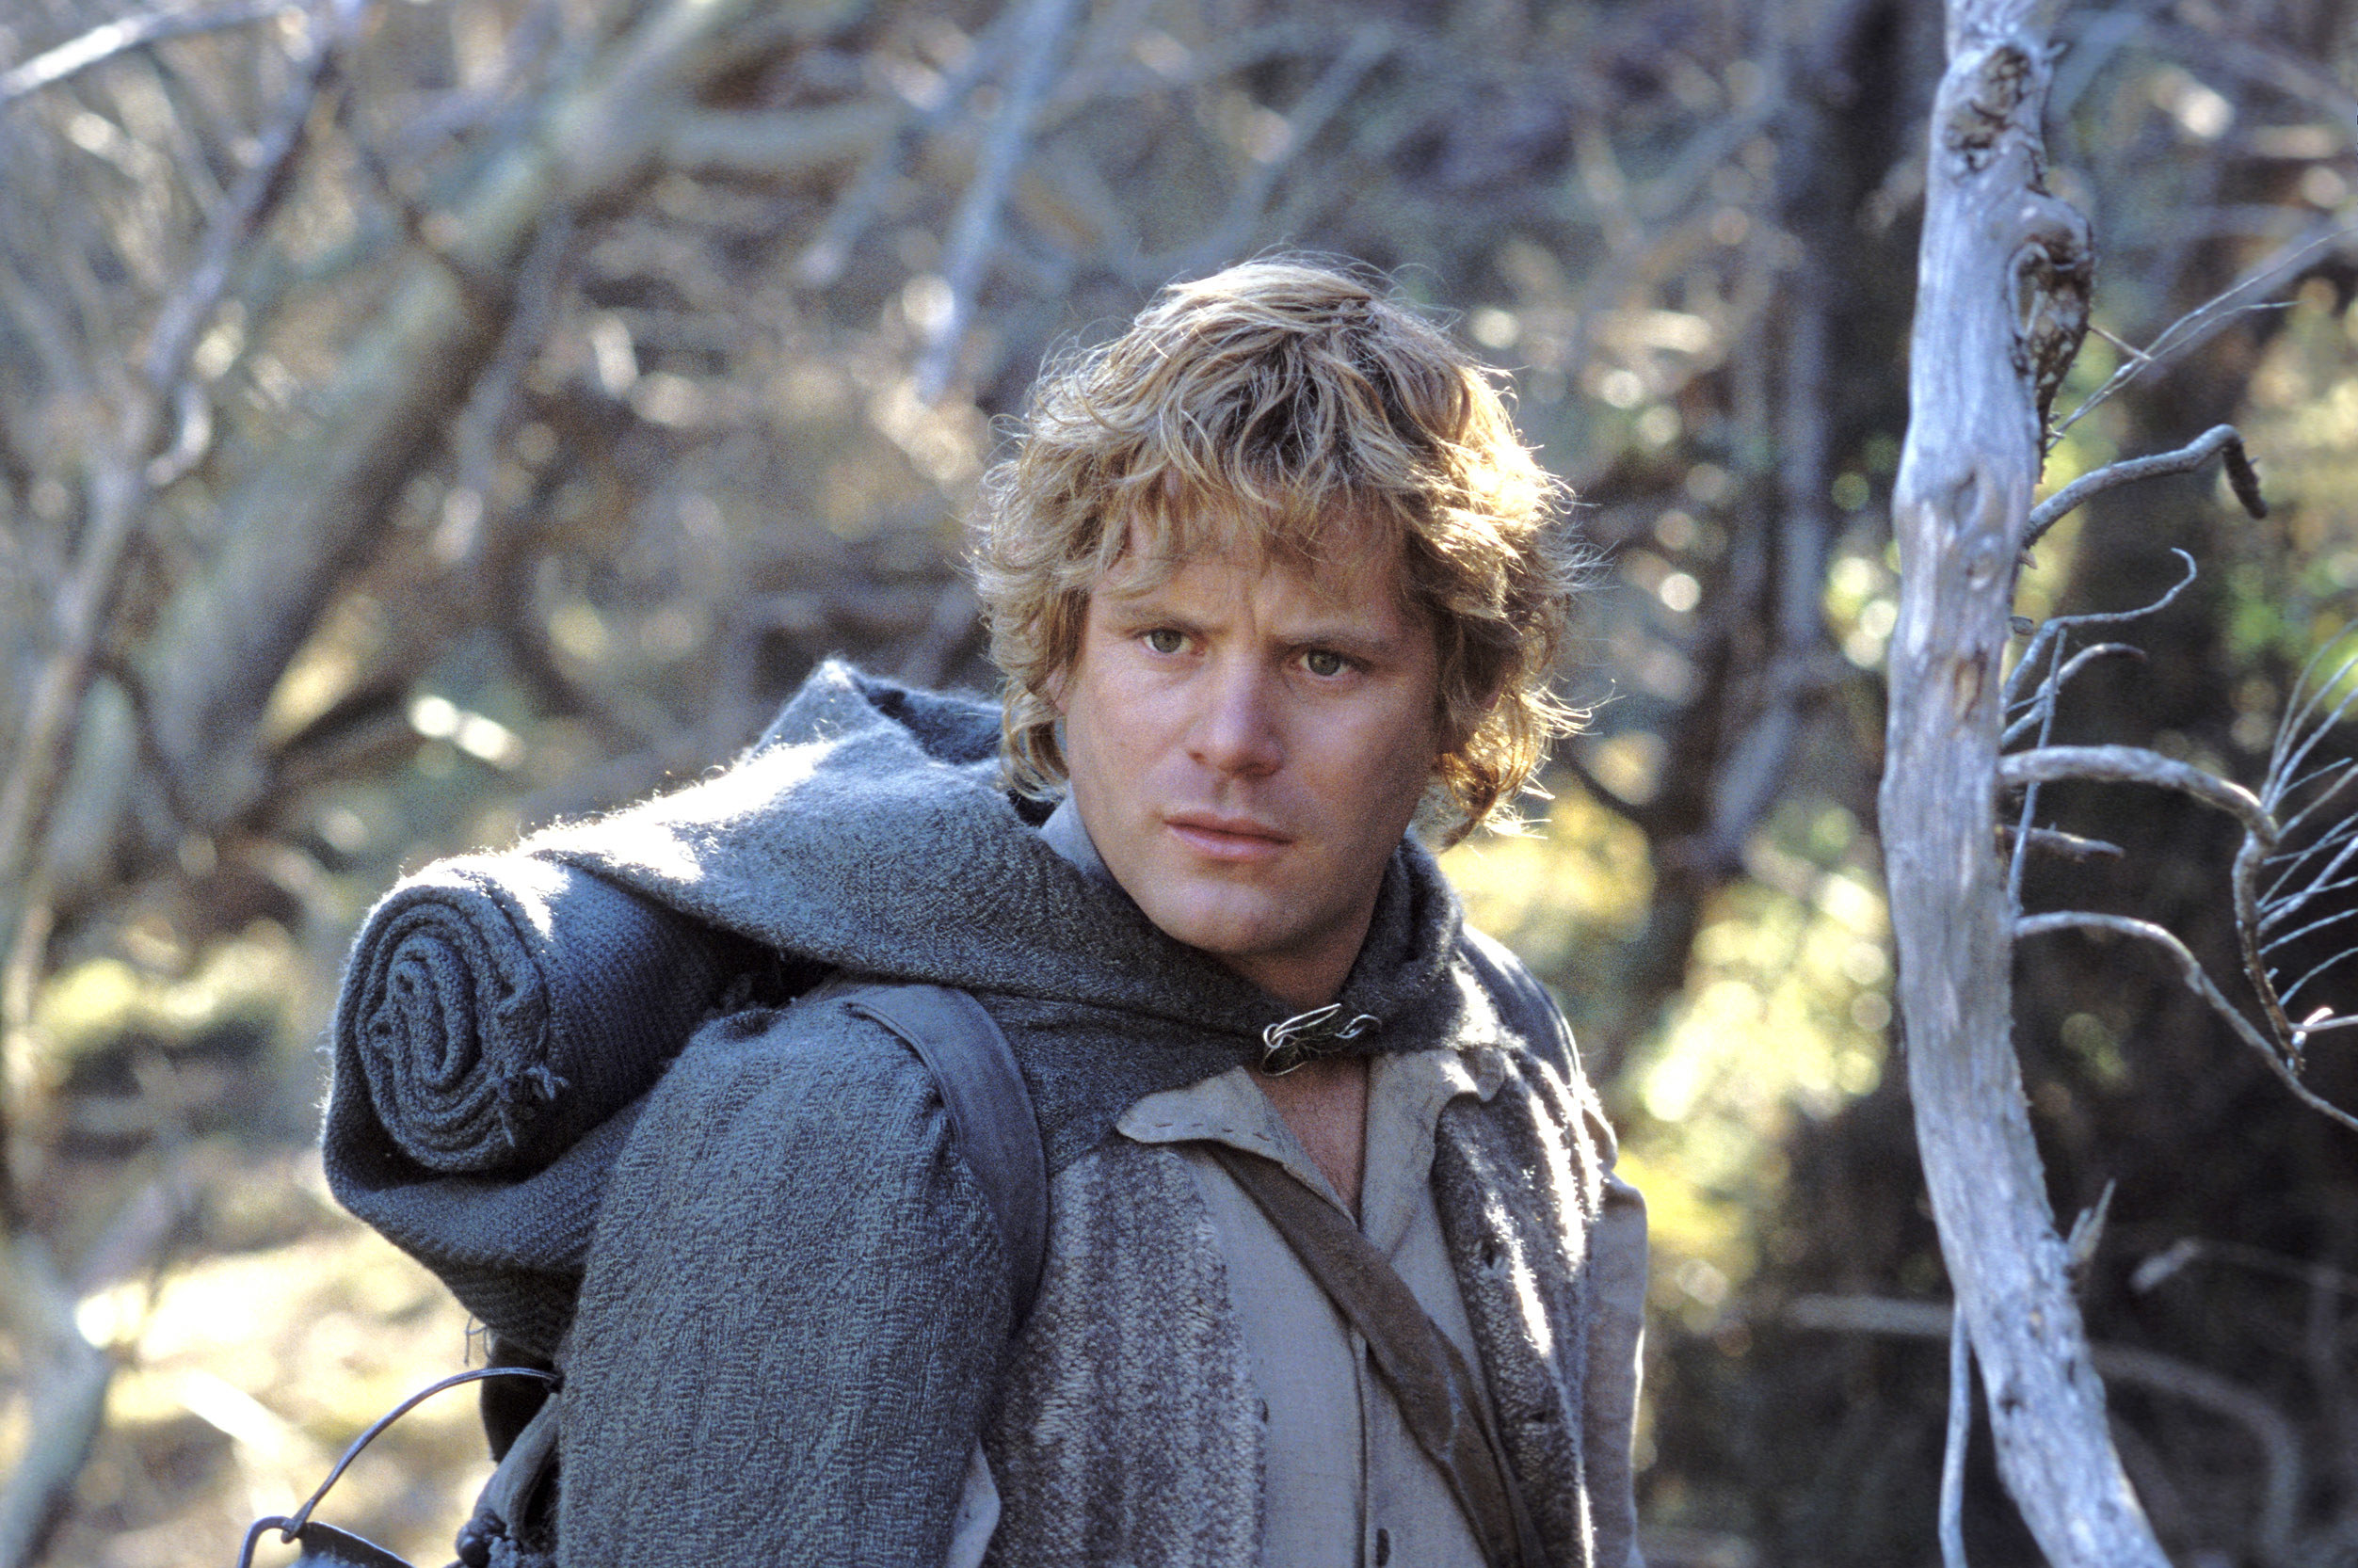 Sean as Samwise Gamgee in &quot;Lord of the Rings&quot;